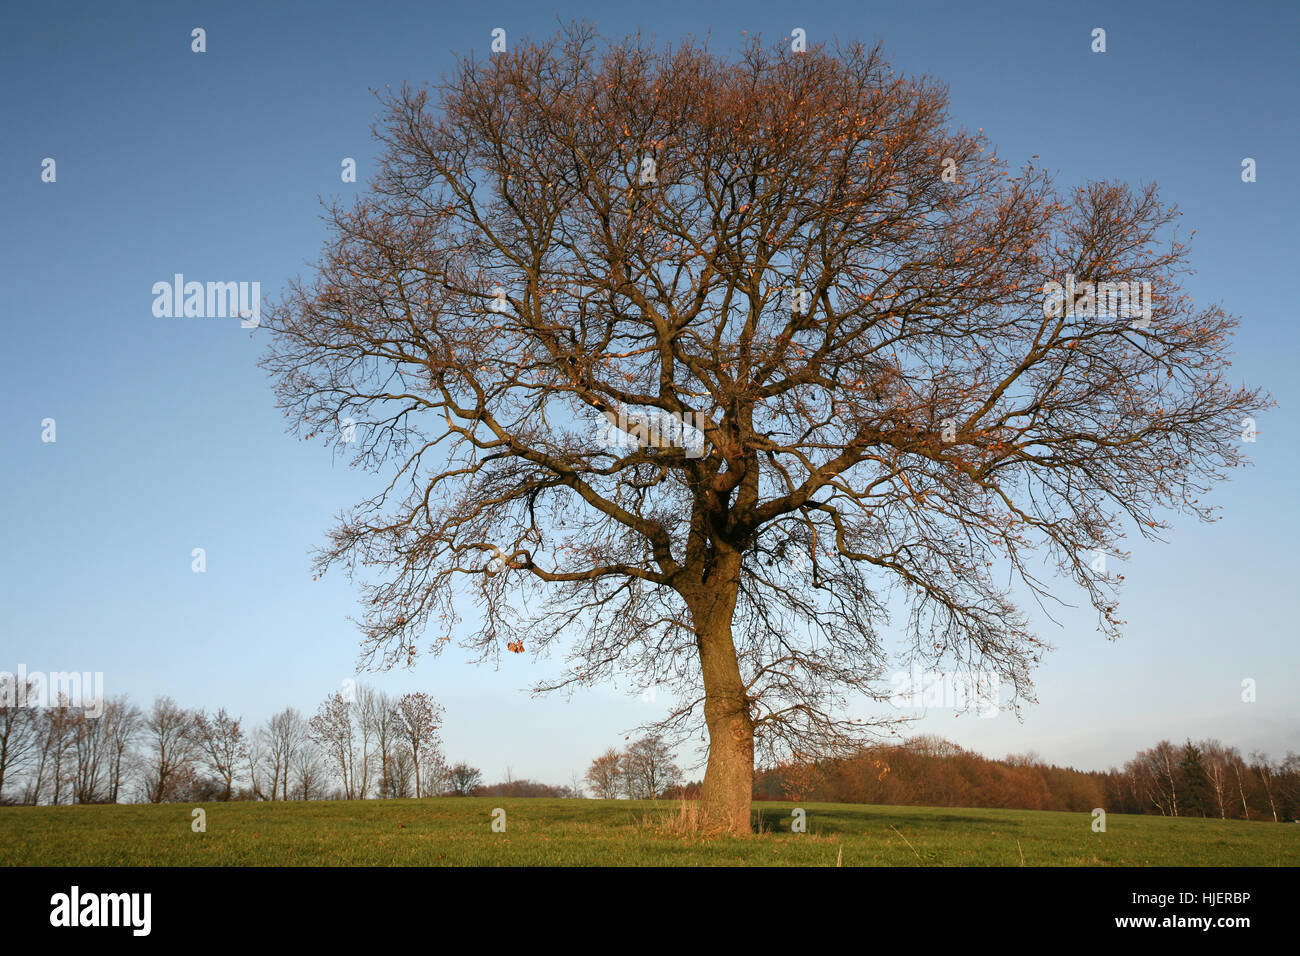 big, large, enormous, extreme, powerful, imposing, immense, relevant, tree, Stock Photo